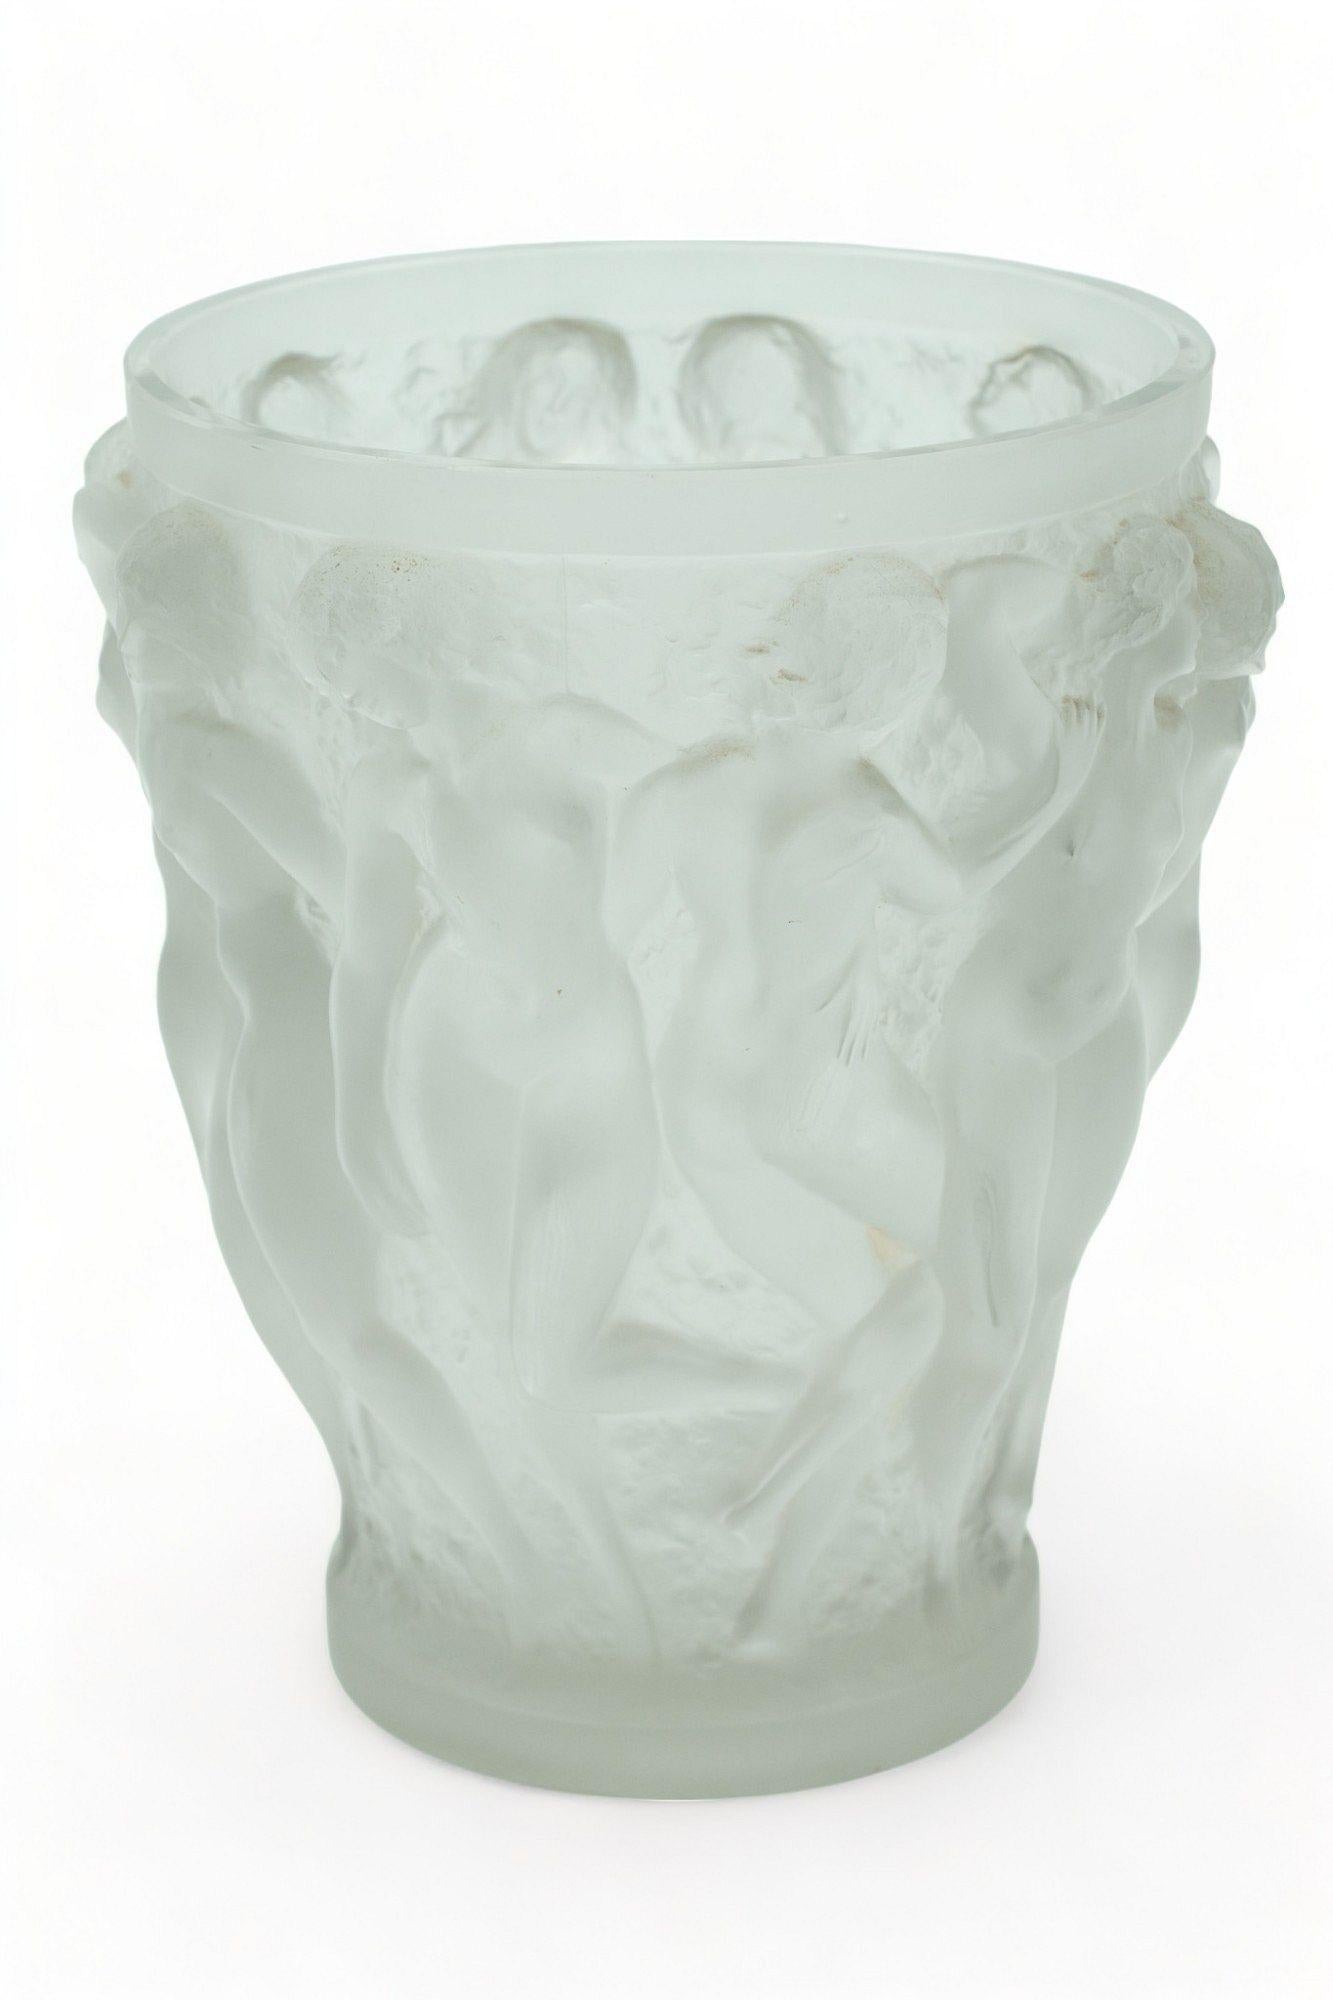 The Following Item we are offering is a Rare Important Large Rene Lalique (French (1860-1945) Frosted Crystal Bacchantes Vase giving off a light gray hue. Signed on underside 